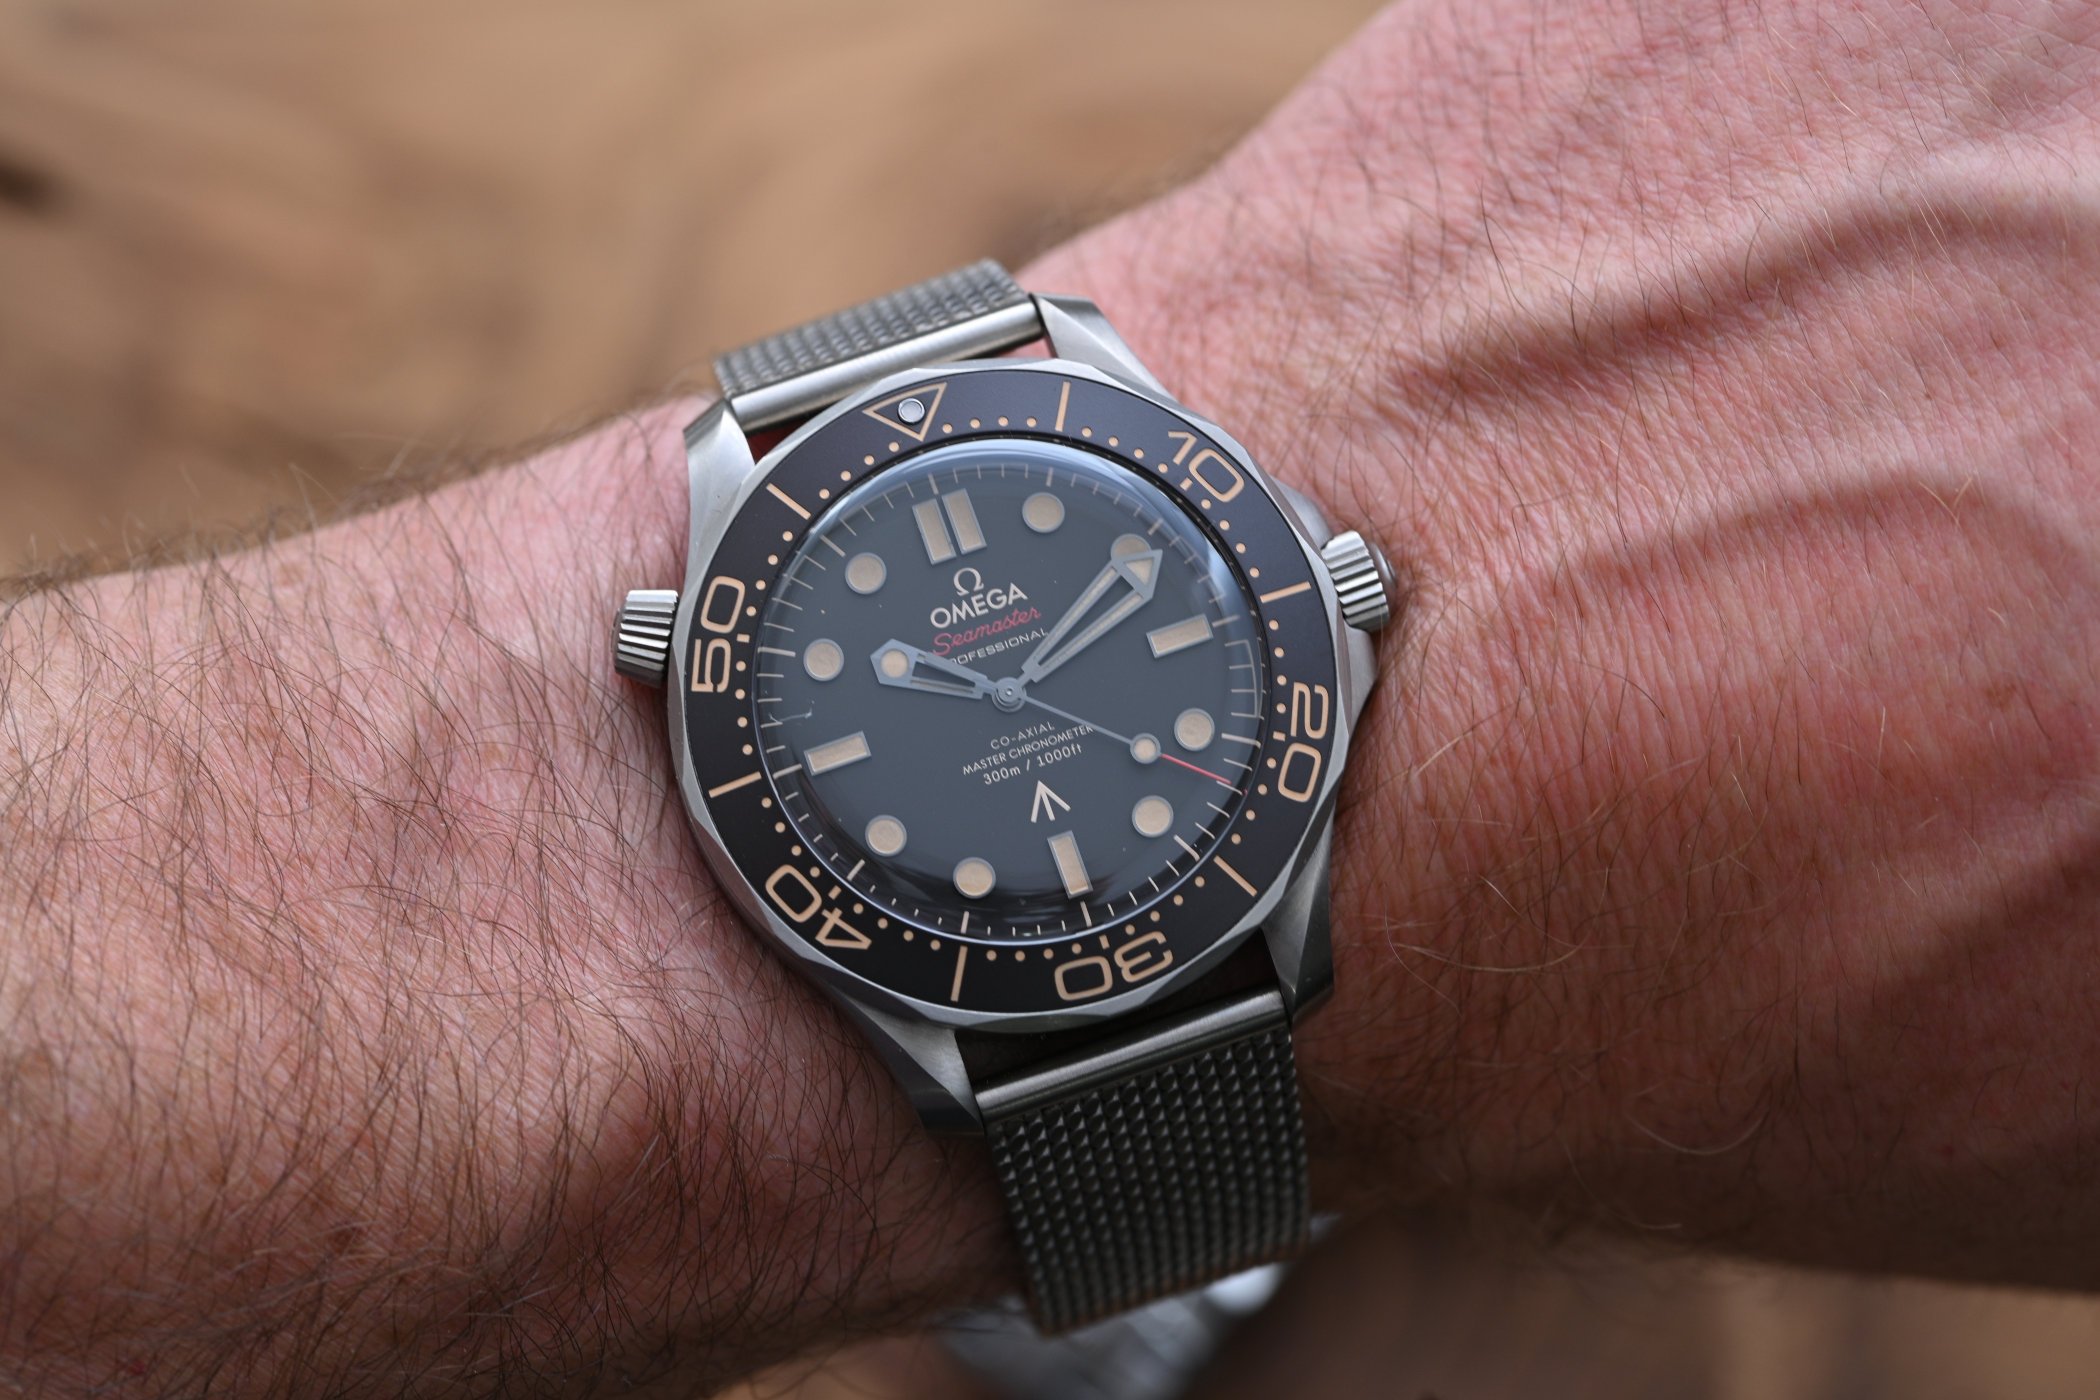 Omega Seamaster Diver 300m 007 Edition Monochrome Watches